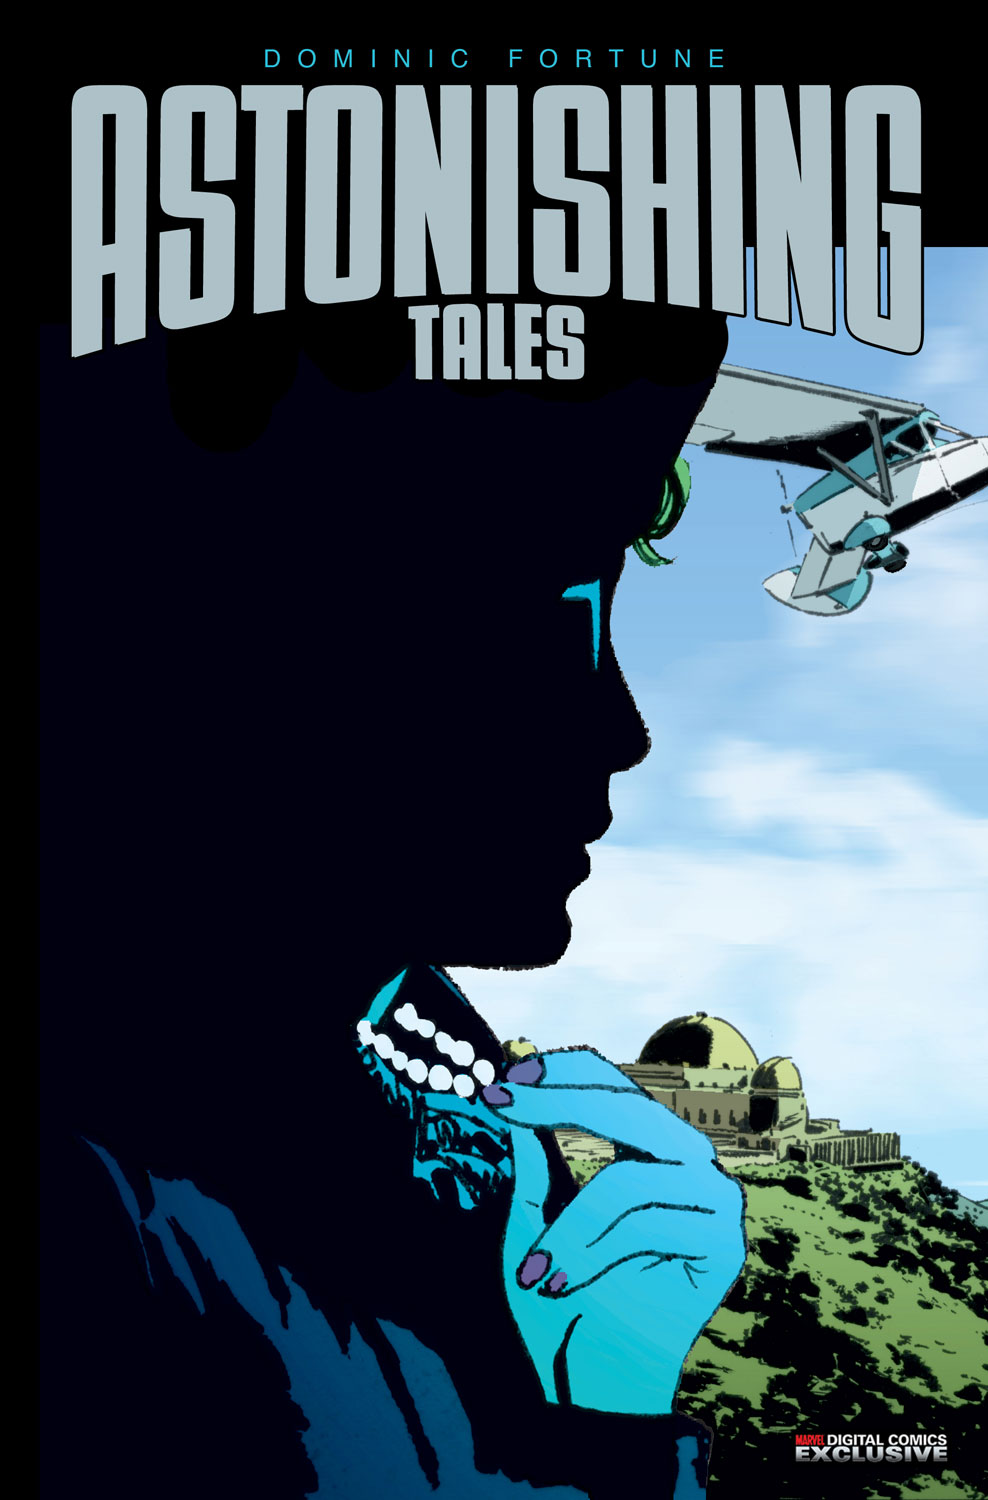 Read online Astonishing Tales: Dominic Fortune comic -  Issue #1 - 1